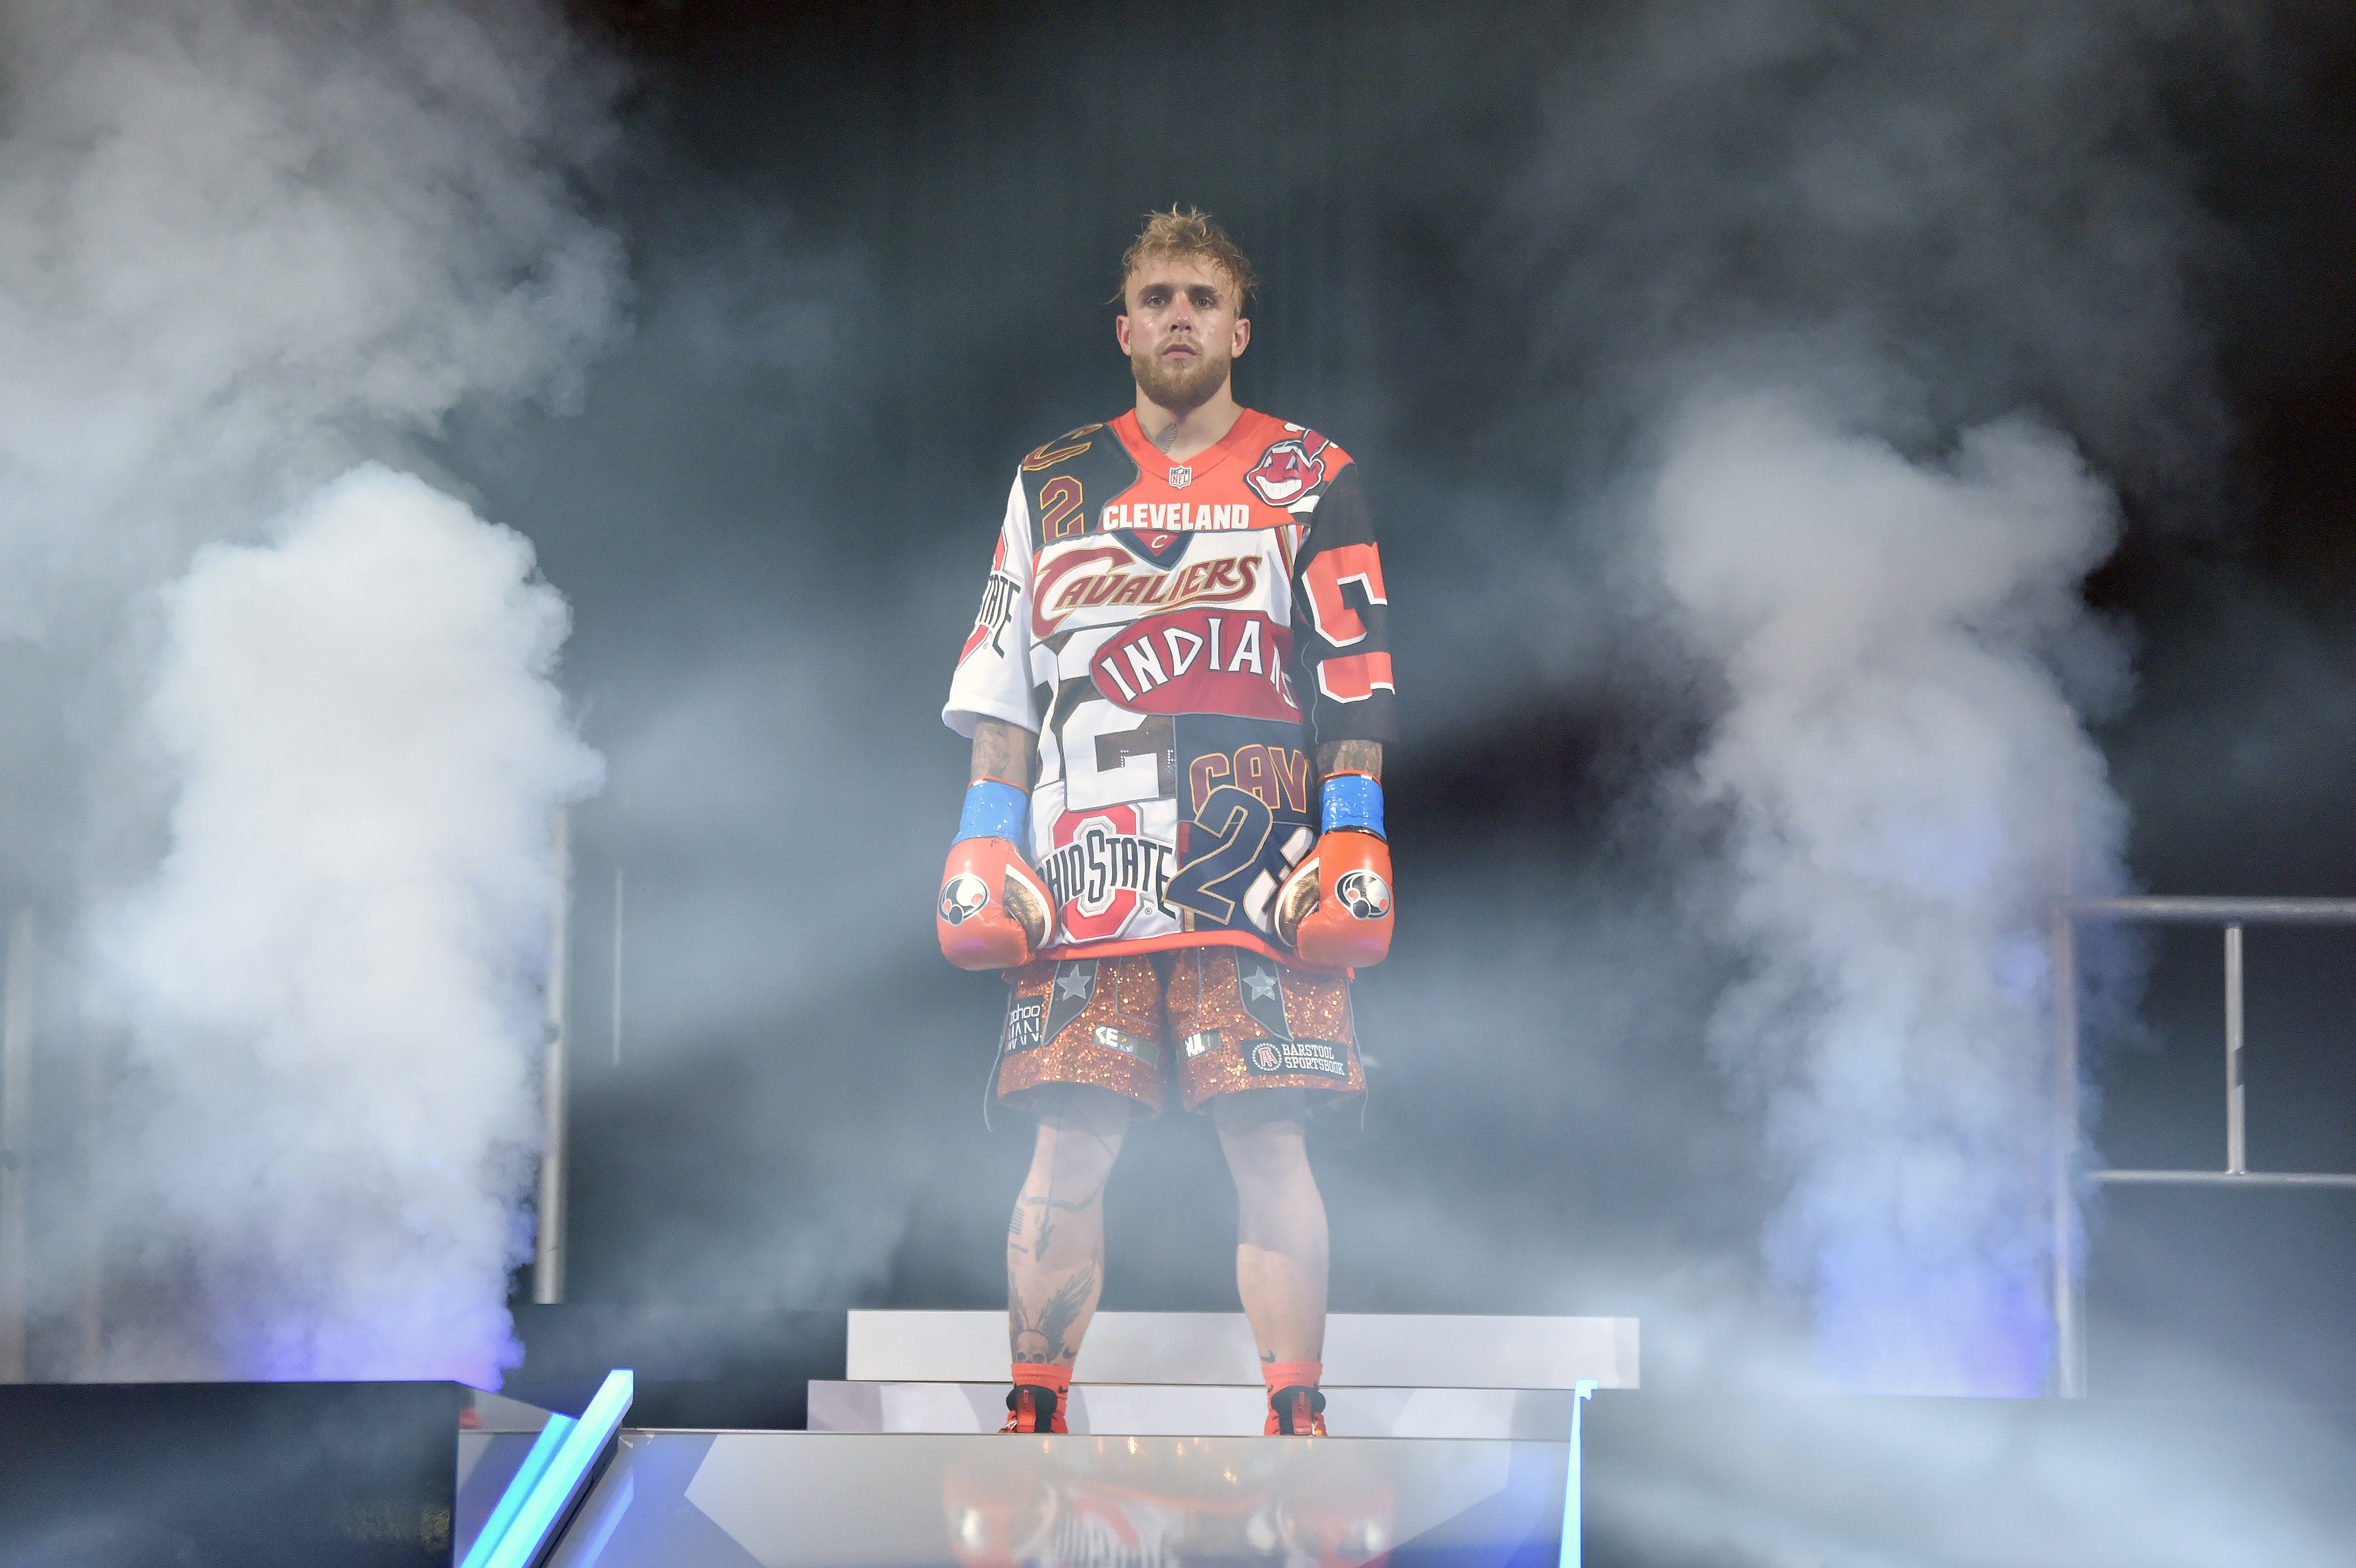 Jake Paul enters the arena prior to the fight against Tyron Woodley in their cruiserweight bout during a Showtime pay-per-view event at Rocket Morgage Fieldhouse on August 29, 2021 in Cleveland, Ohio.